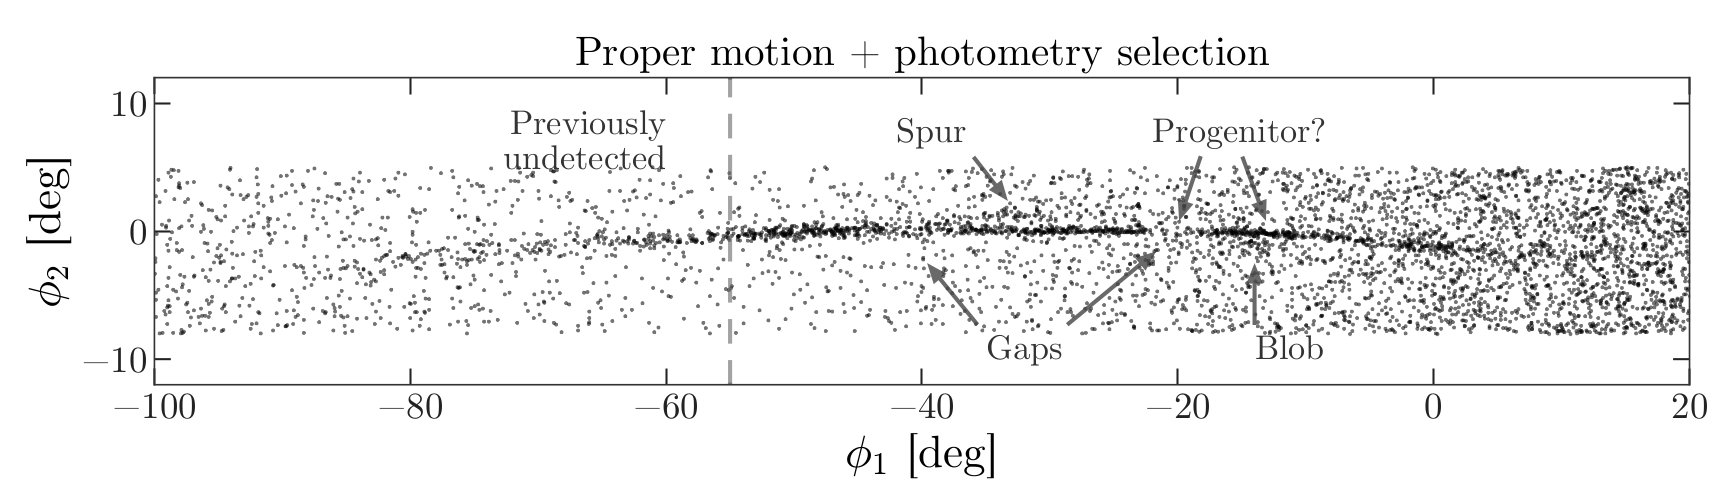 Scatter plot with selection on proper motion and photometry showing many stars in GD-1 are within 1 degree of phi2 = 0.